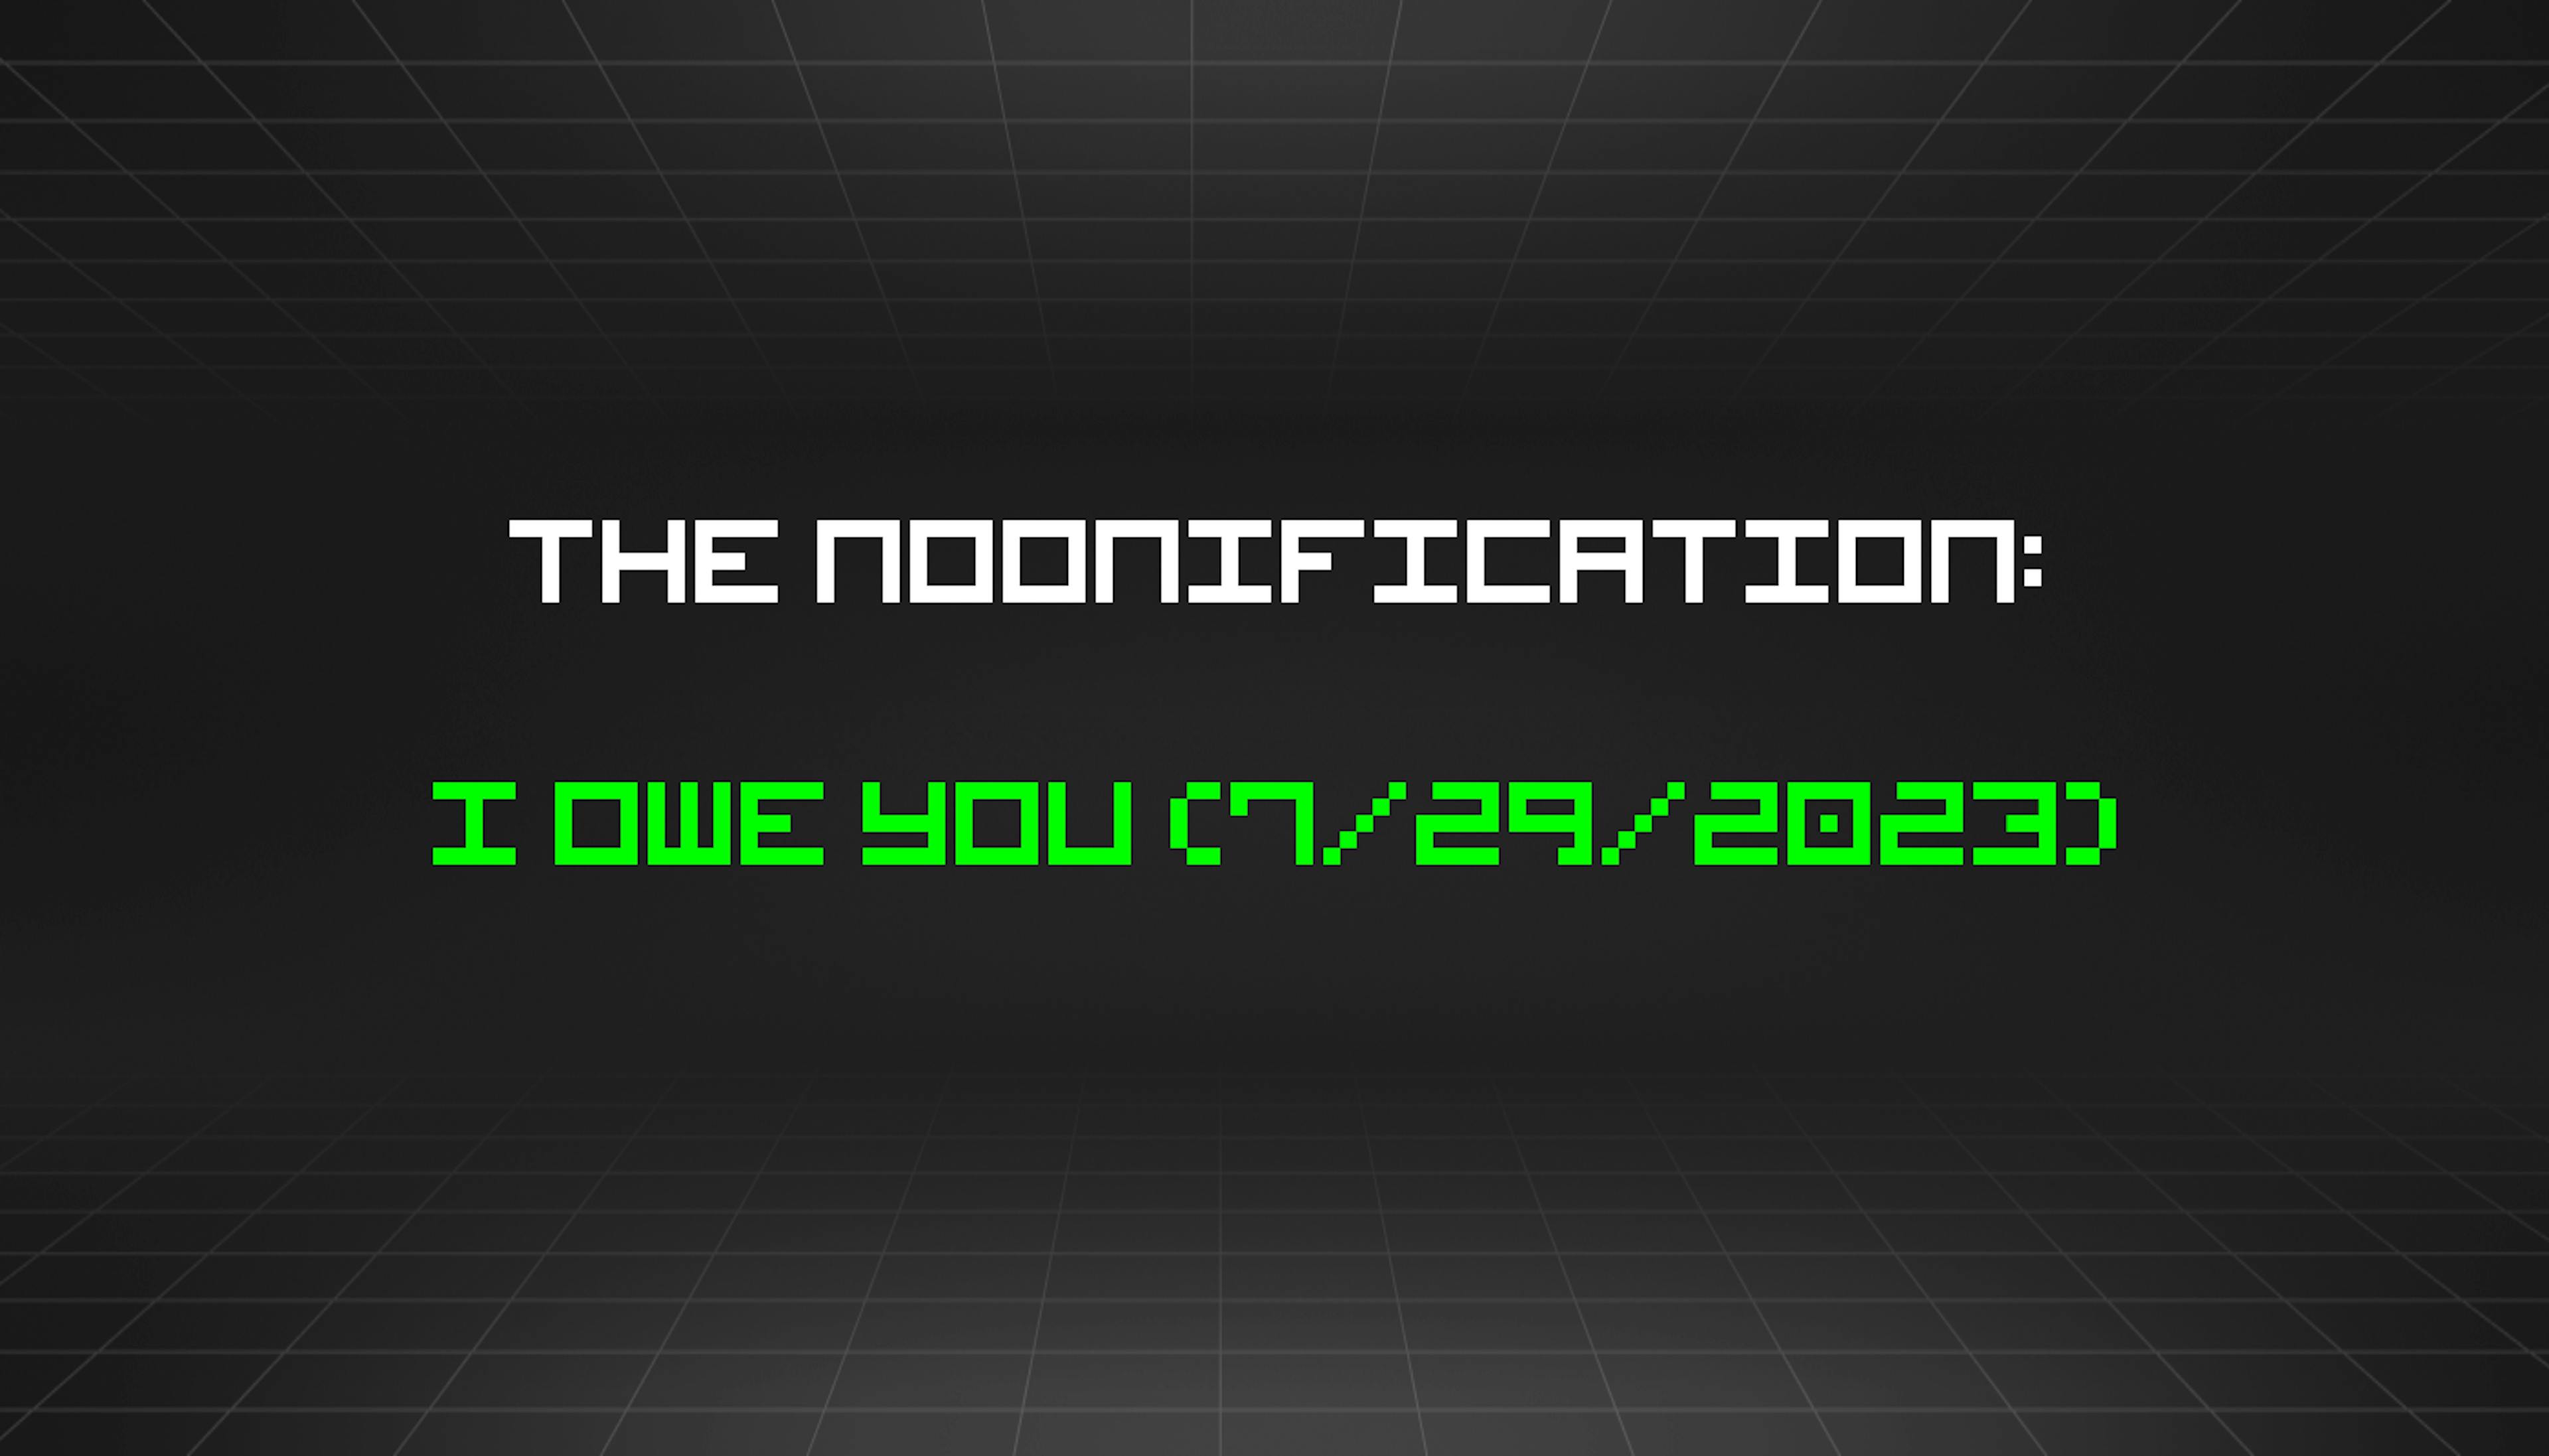 /7-29-2023-noonification feature image